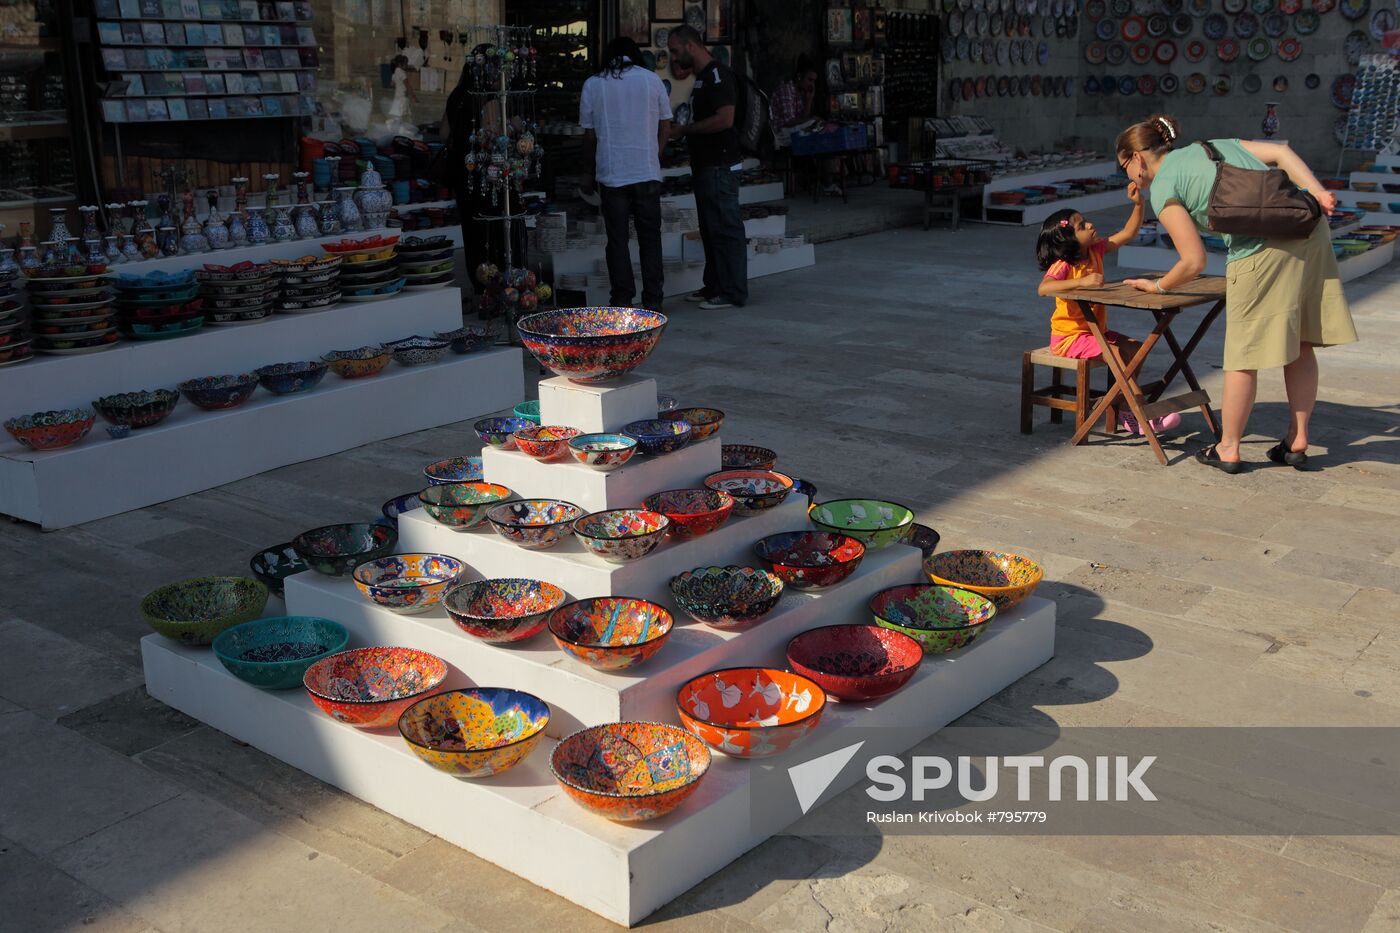 Street trading in Istanbul